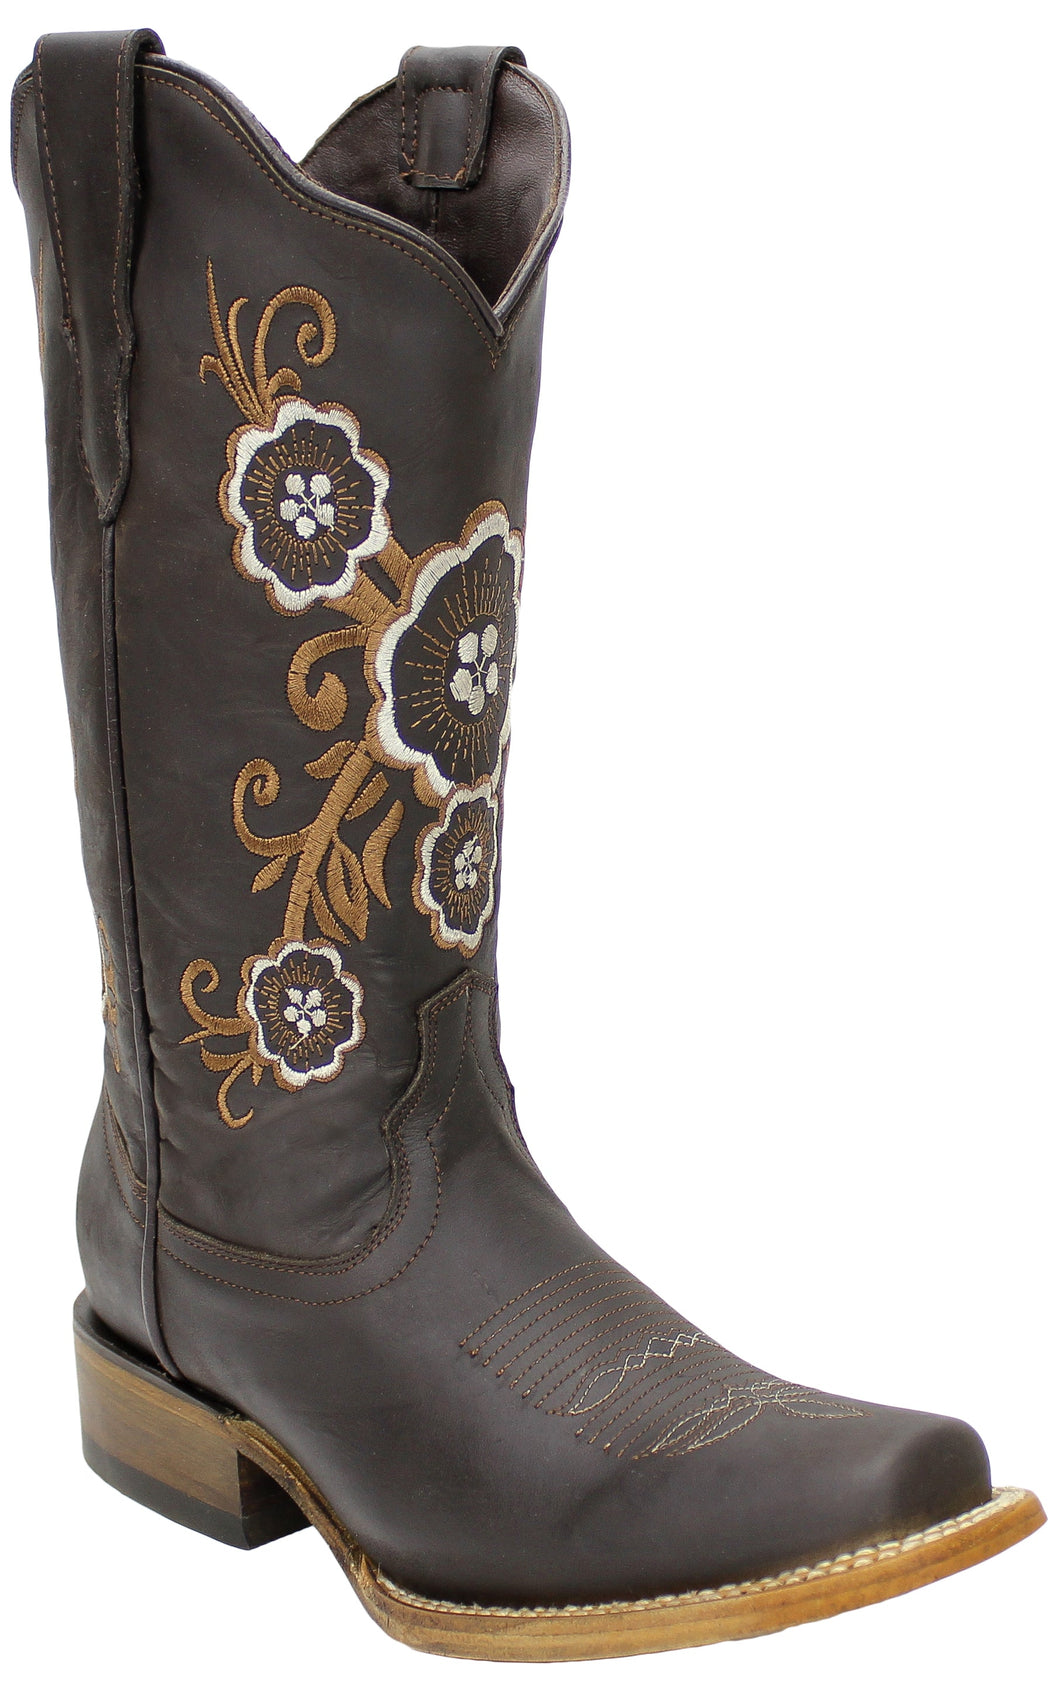 Silverton Linda All Leather Square Toe Boots (Chocolate)